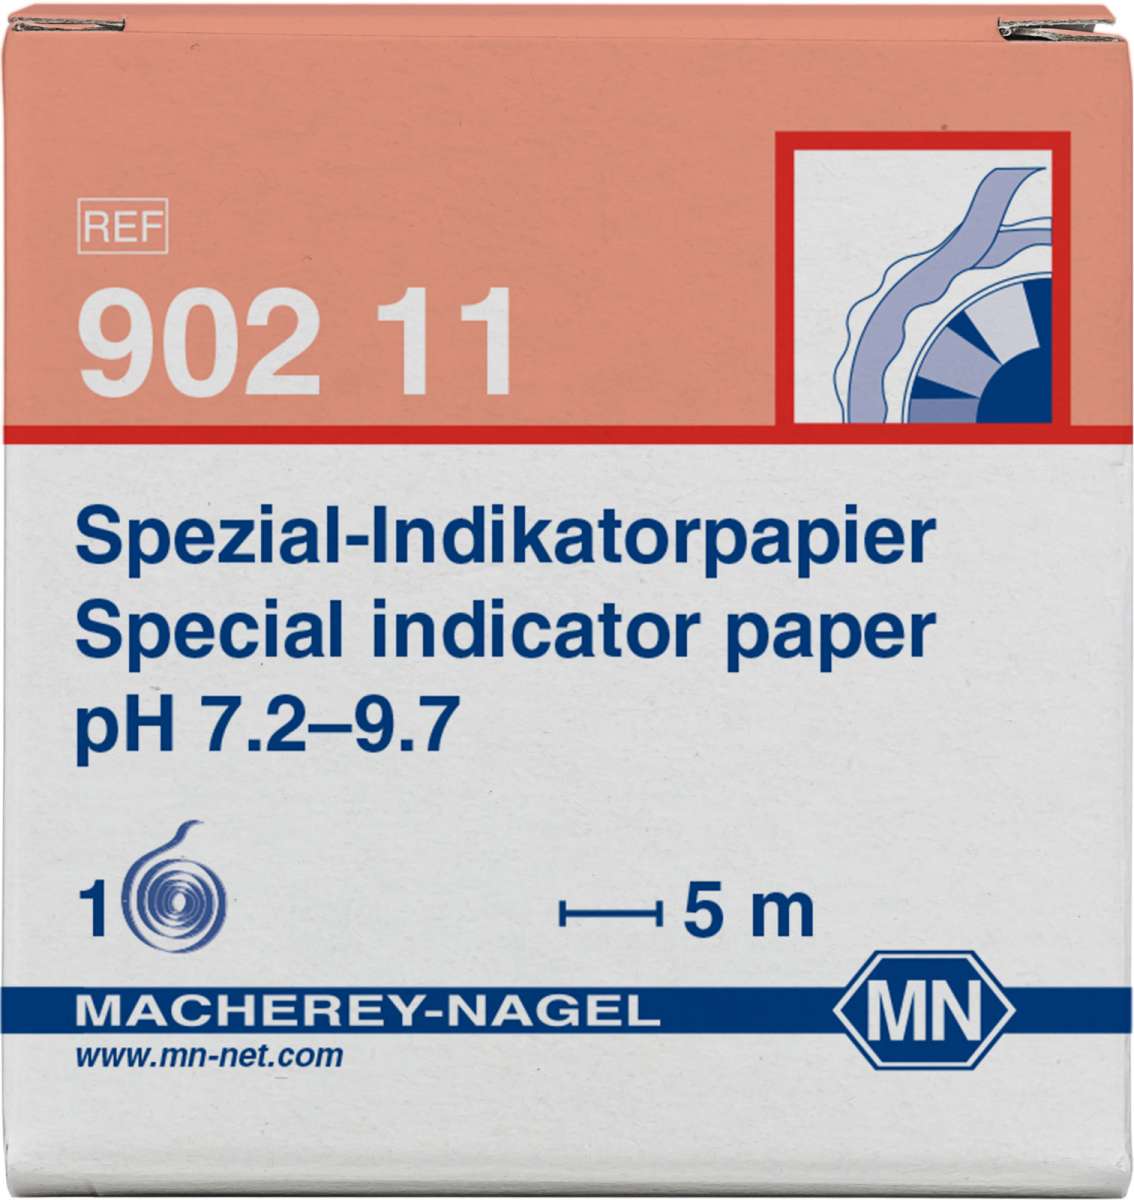 Special indicator paper pH 7.2 to 9.7 (Reel of 5m length and 7mm width)